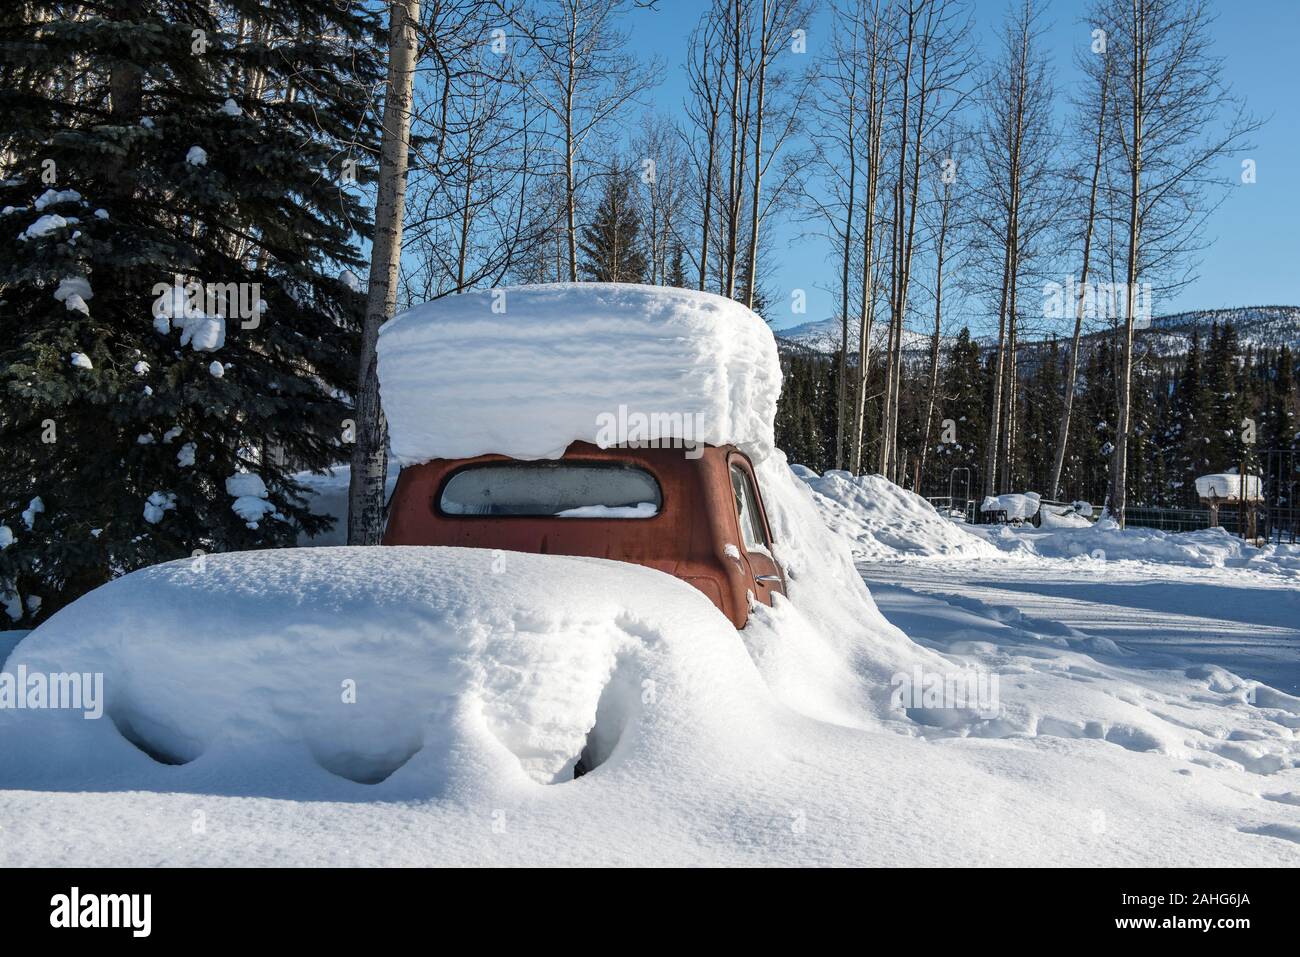 An old red truck buried in snow on a sunny day in the Alaskan forest Stock Photo